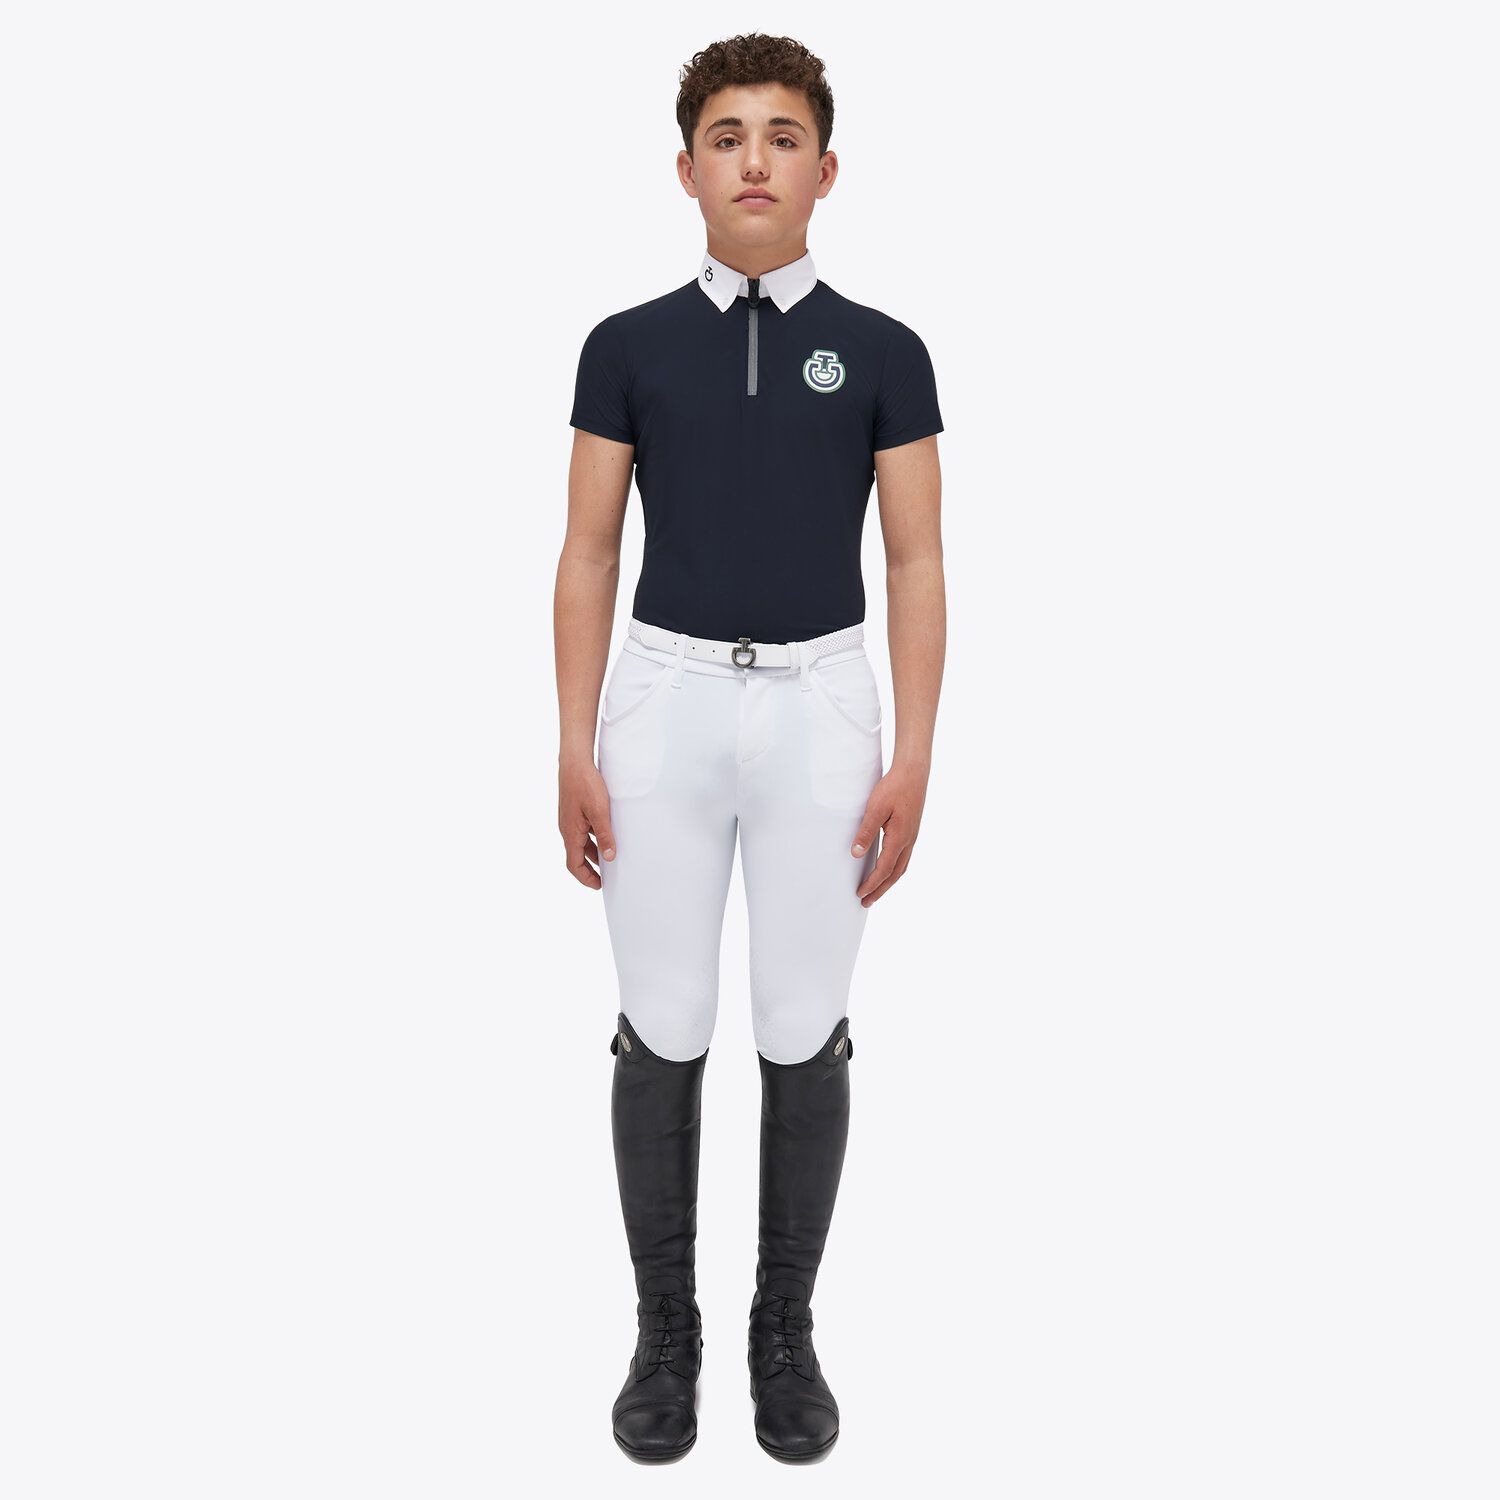 Cavalleria Toscana Boys’ jersey competition shirt with a zip NAVY-2